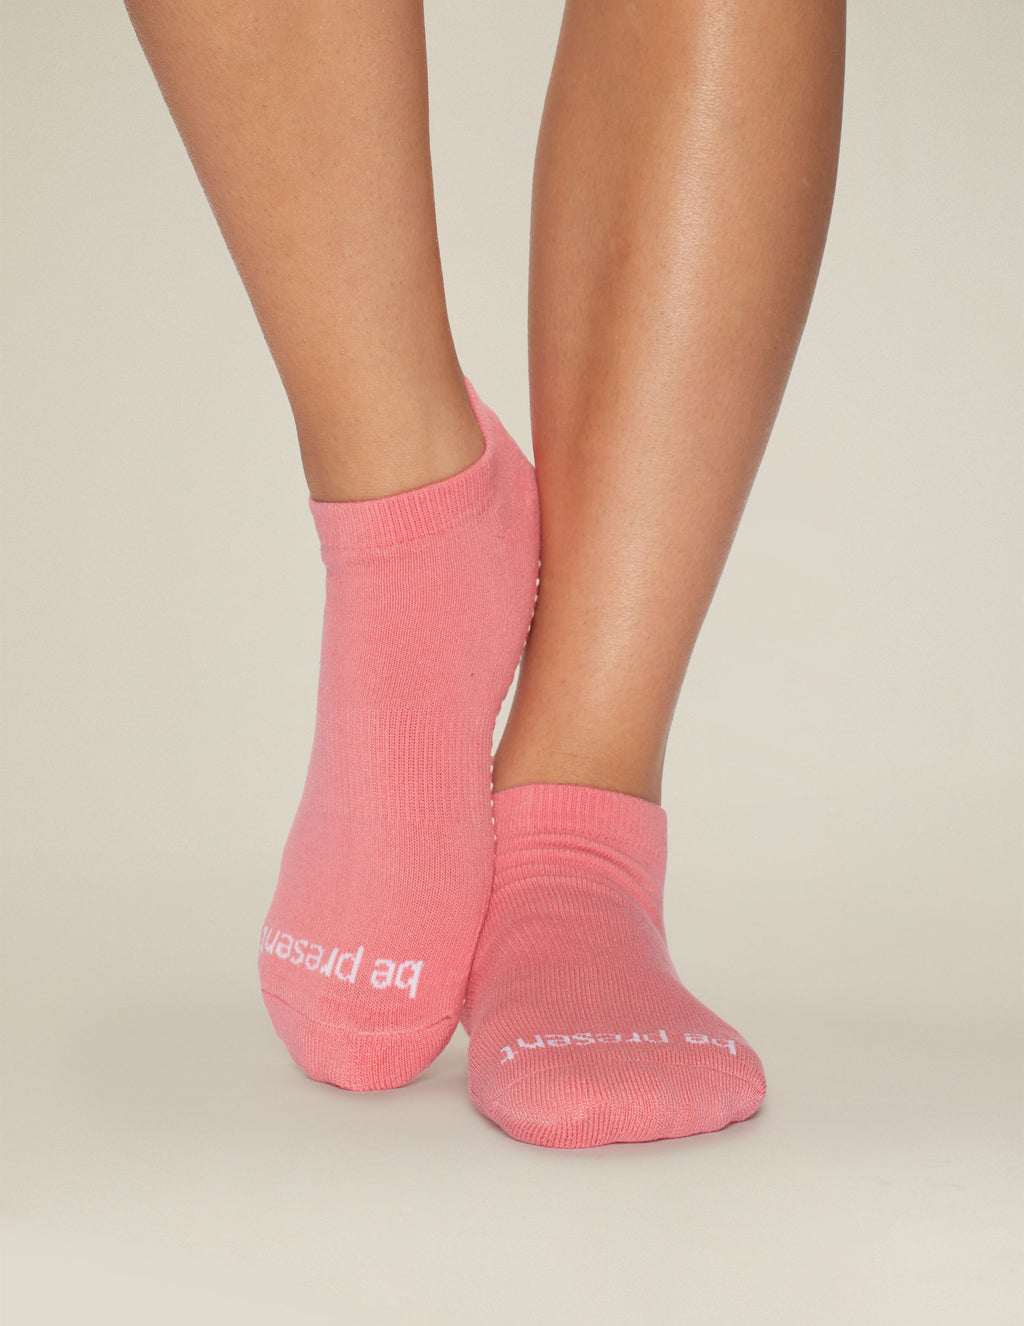 Sticky Be Present Grip Socks Featured Image